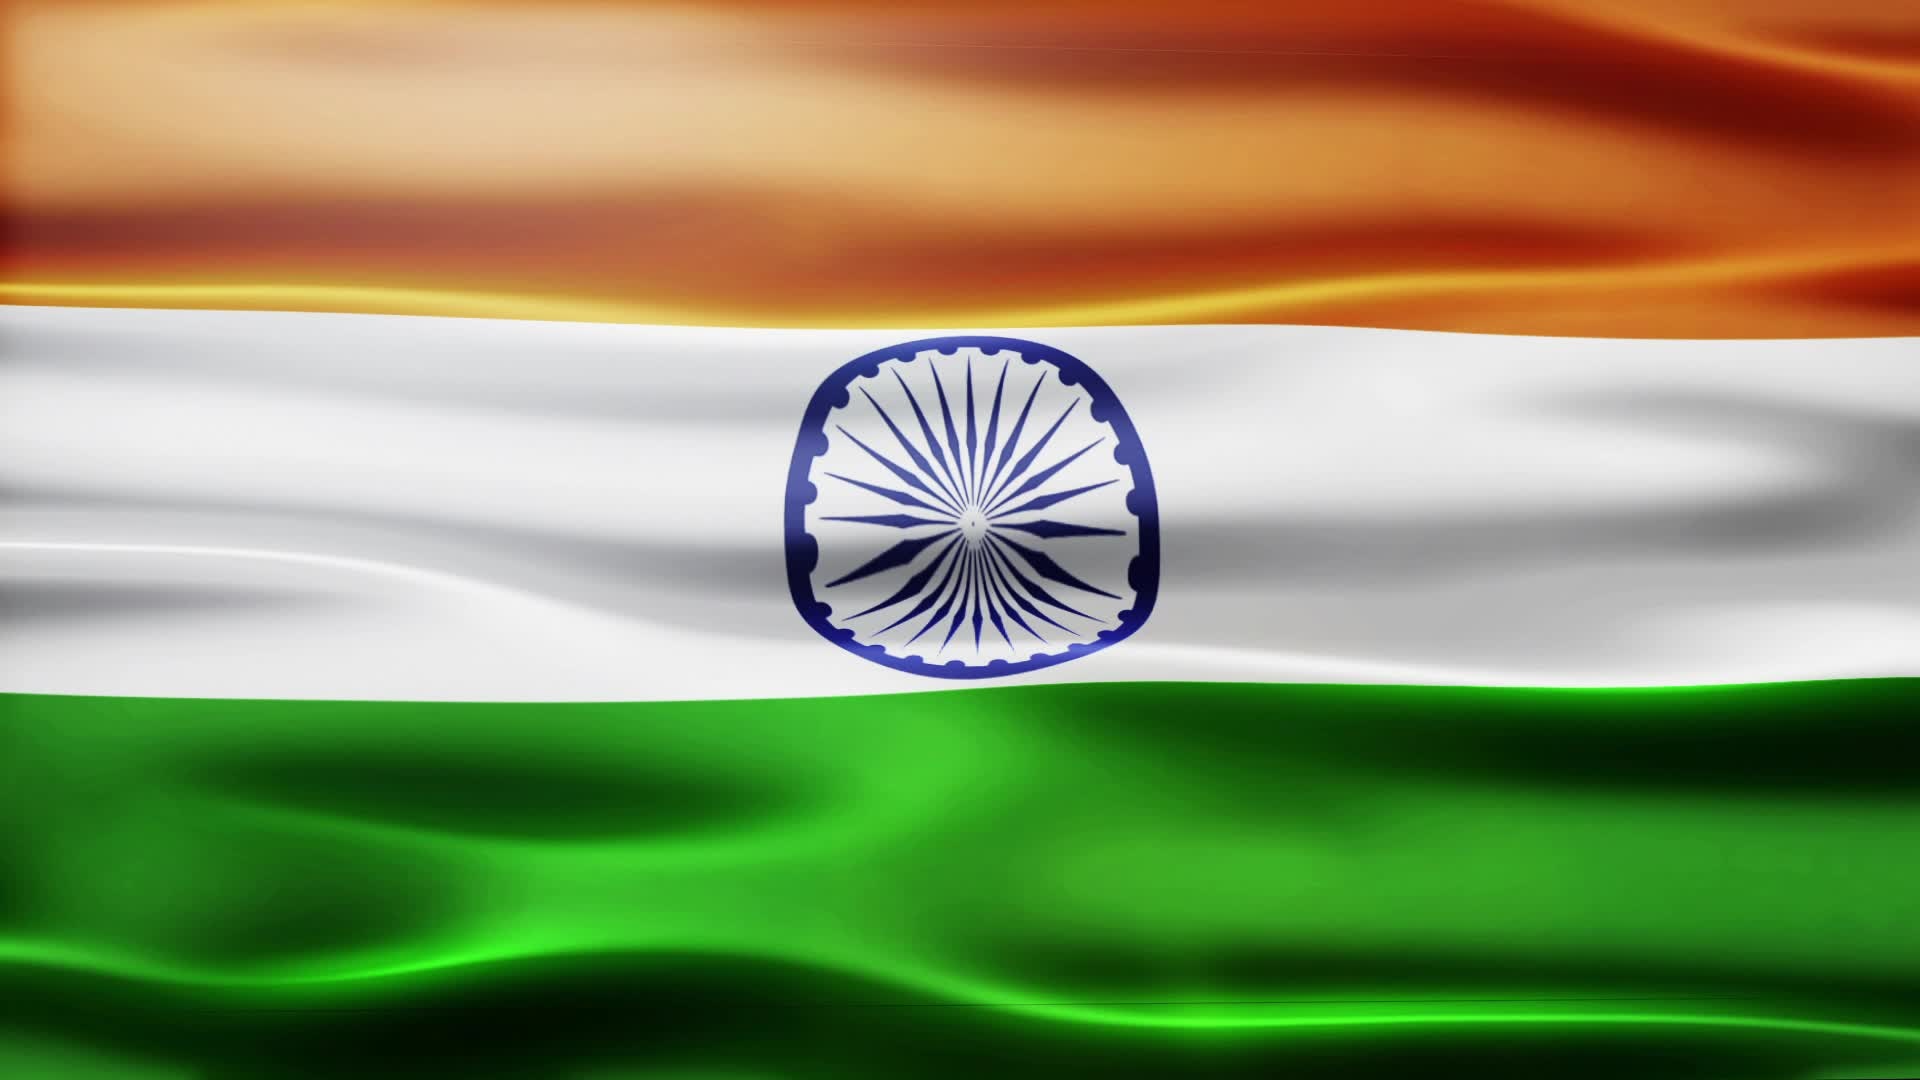 Flag of India, National pride, Historical significance, Cultural heritage, 1920x1080 Full HD Desktop